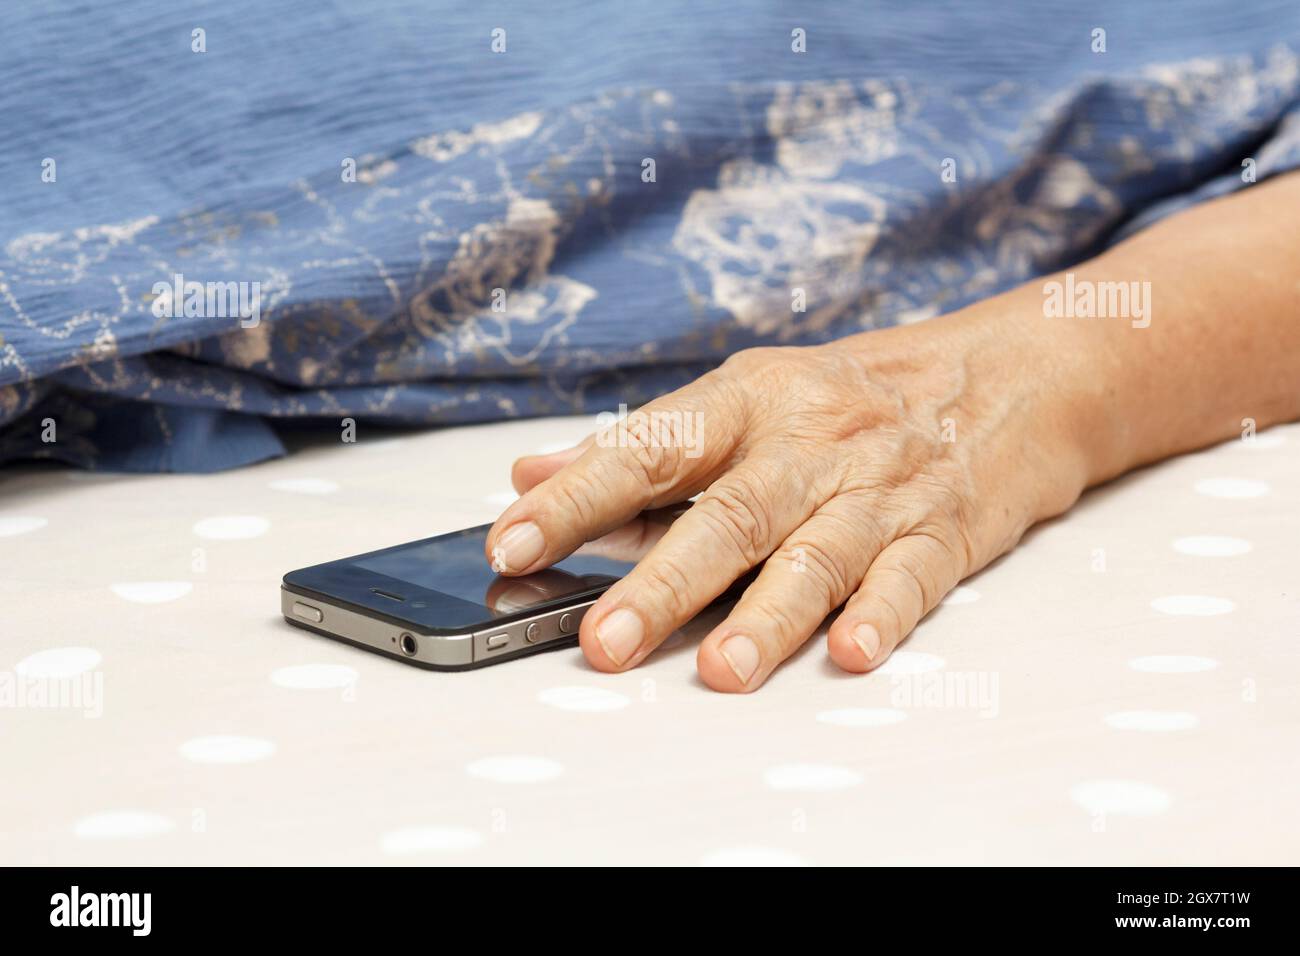 Elderly woman sleeping in bed and holding a mobile phone. Stock Photo